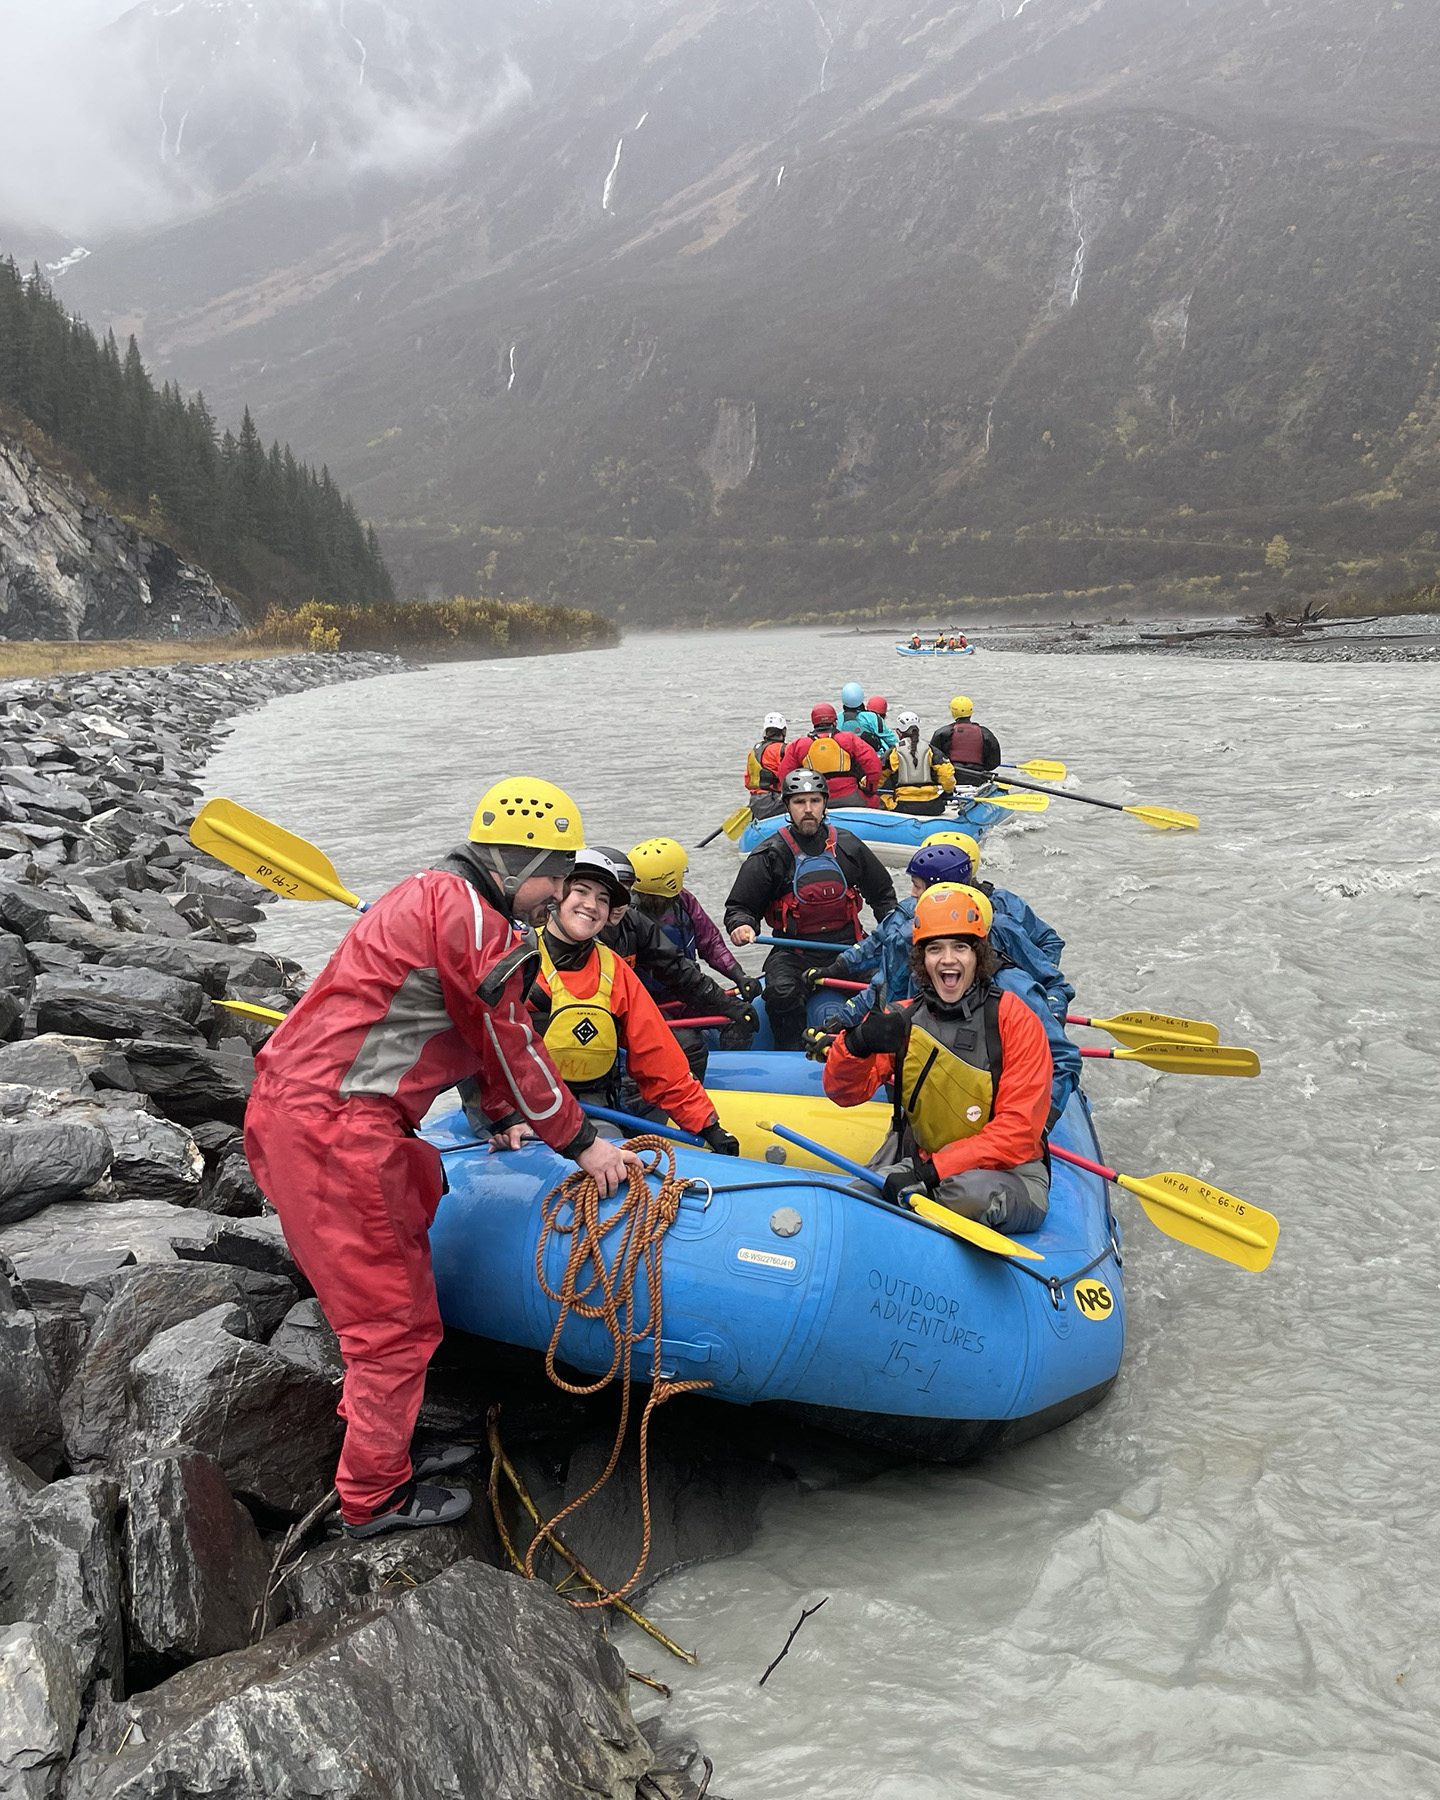 Students, staff and faculty from four universities head out in inflatable rafts for a trip down the Lowe river through historic Keystone Canyon as part of an outdoor leadership conference.